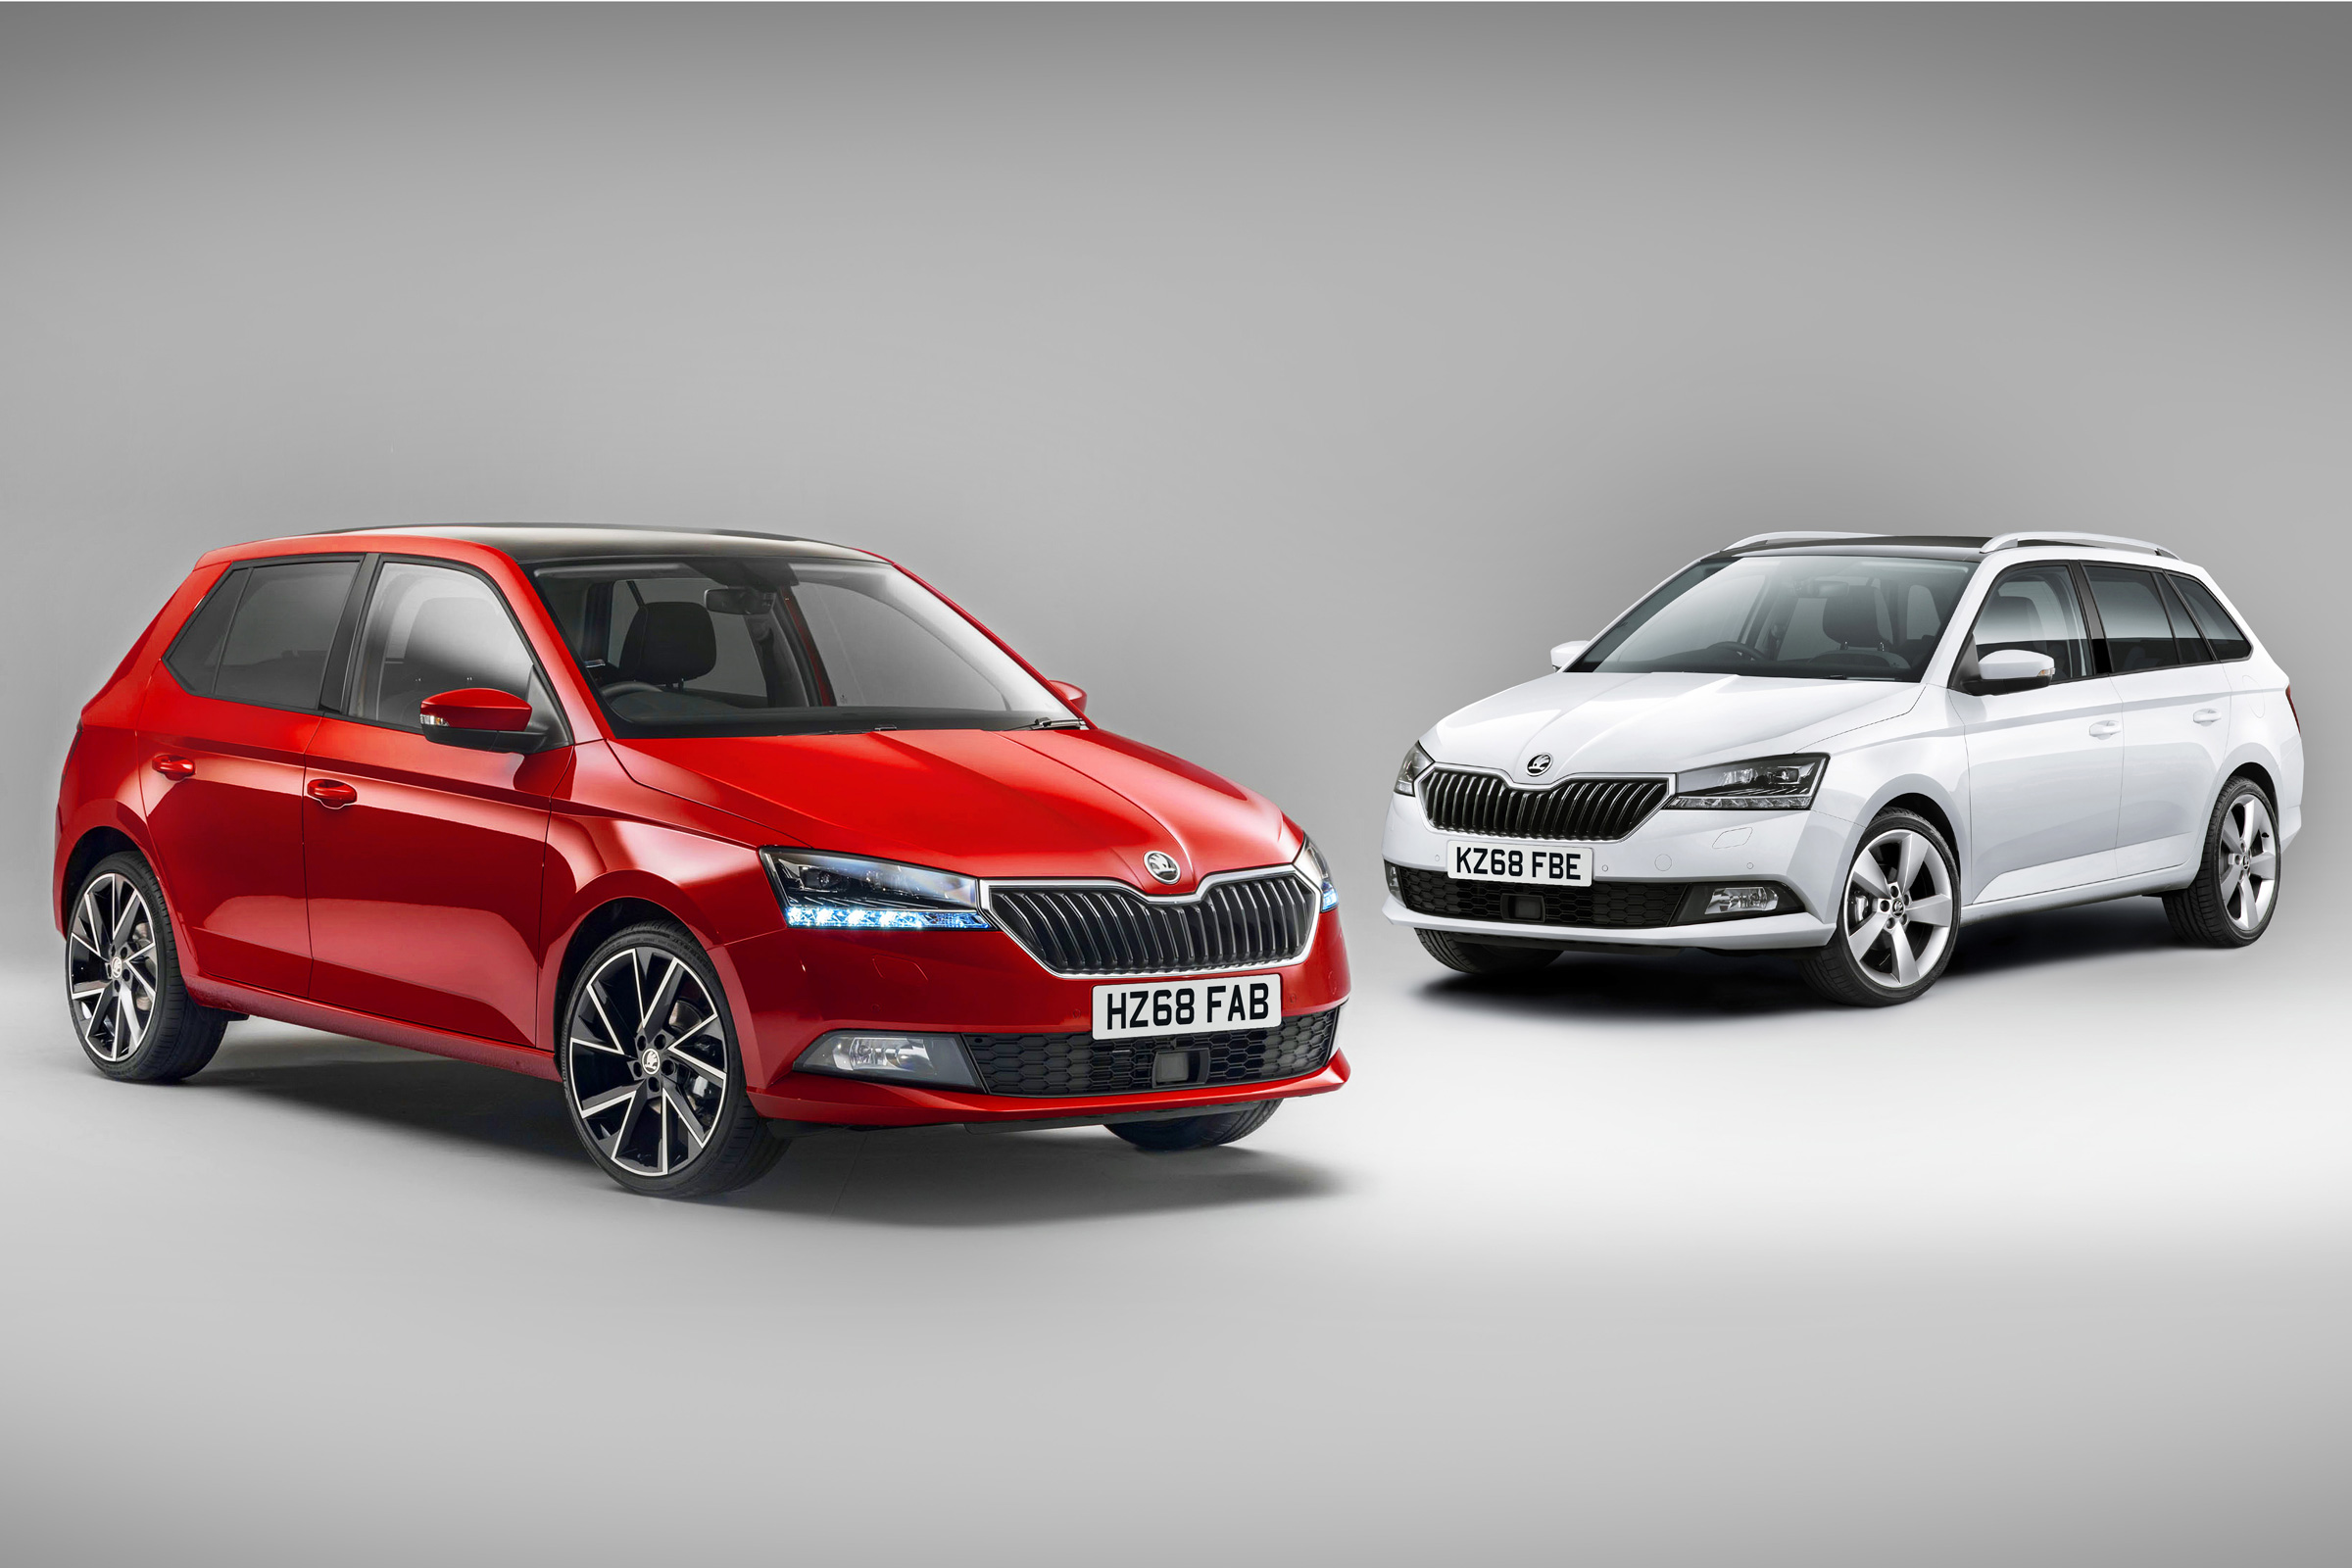 2018 Skoda Fabia prices and specifications Carbuyer